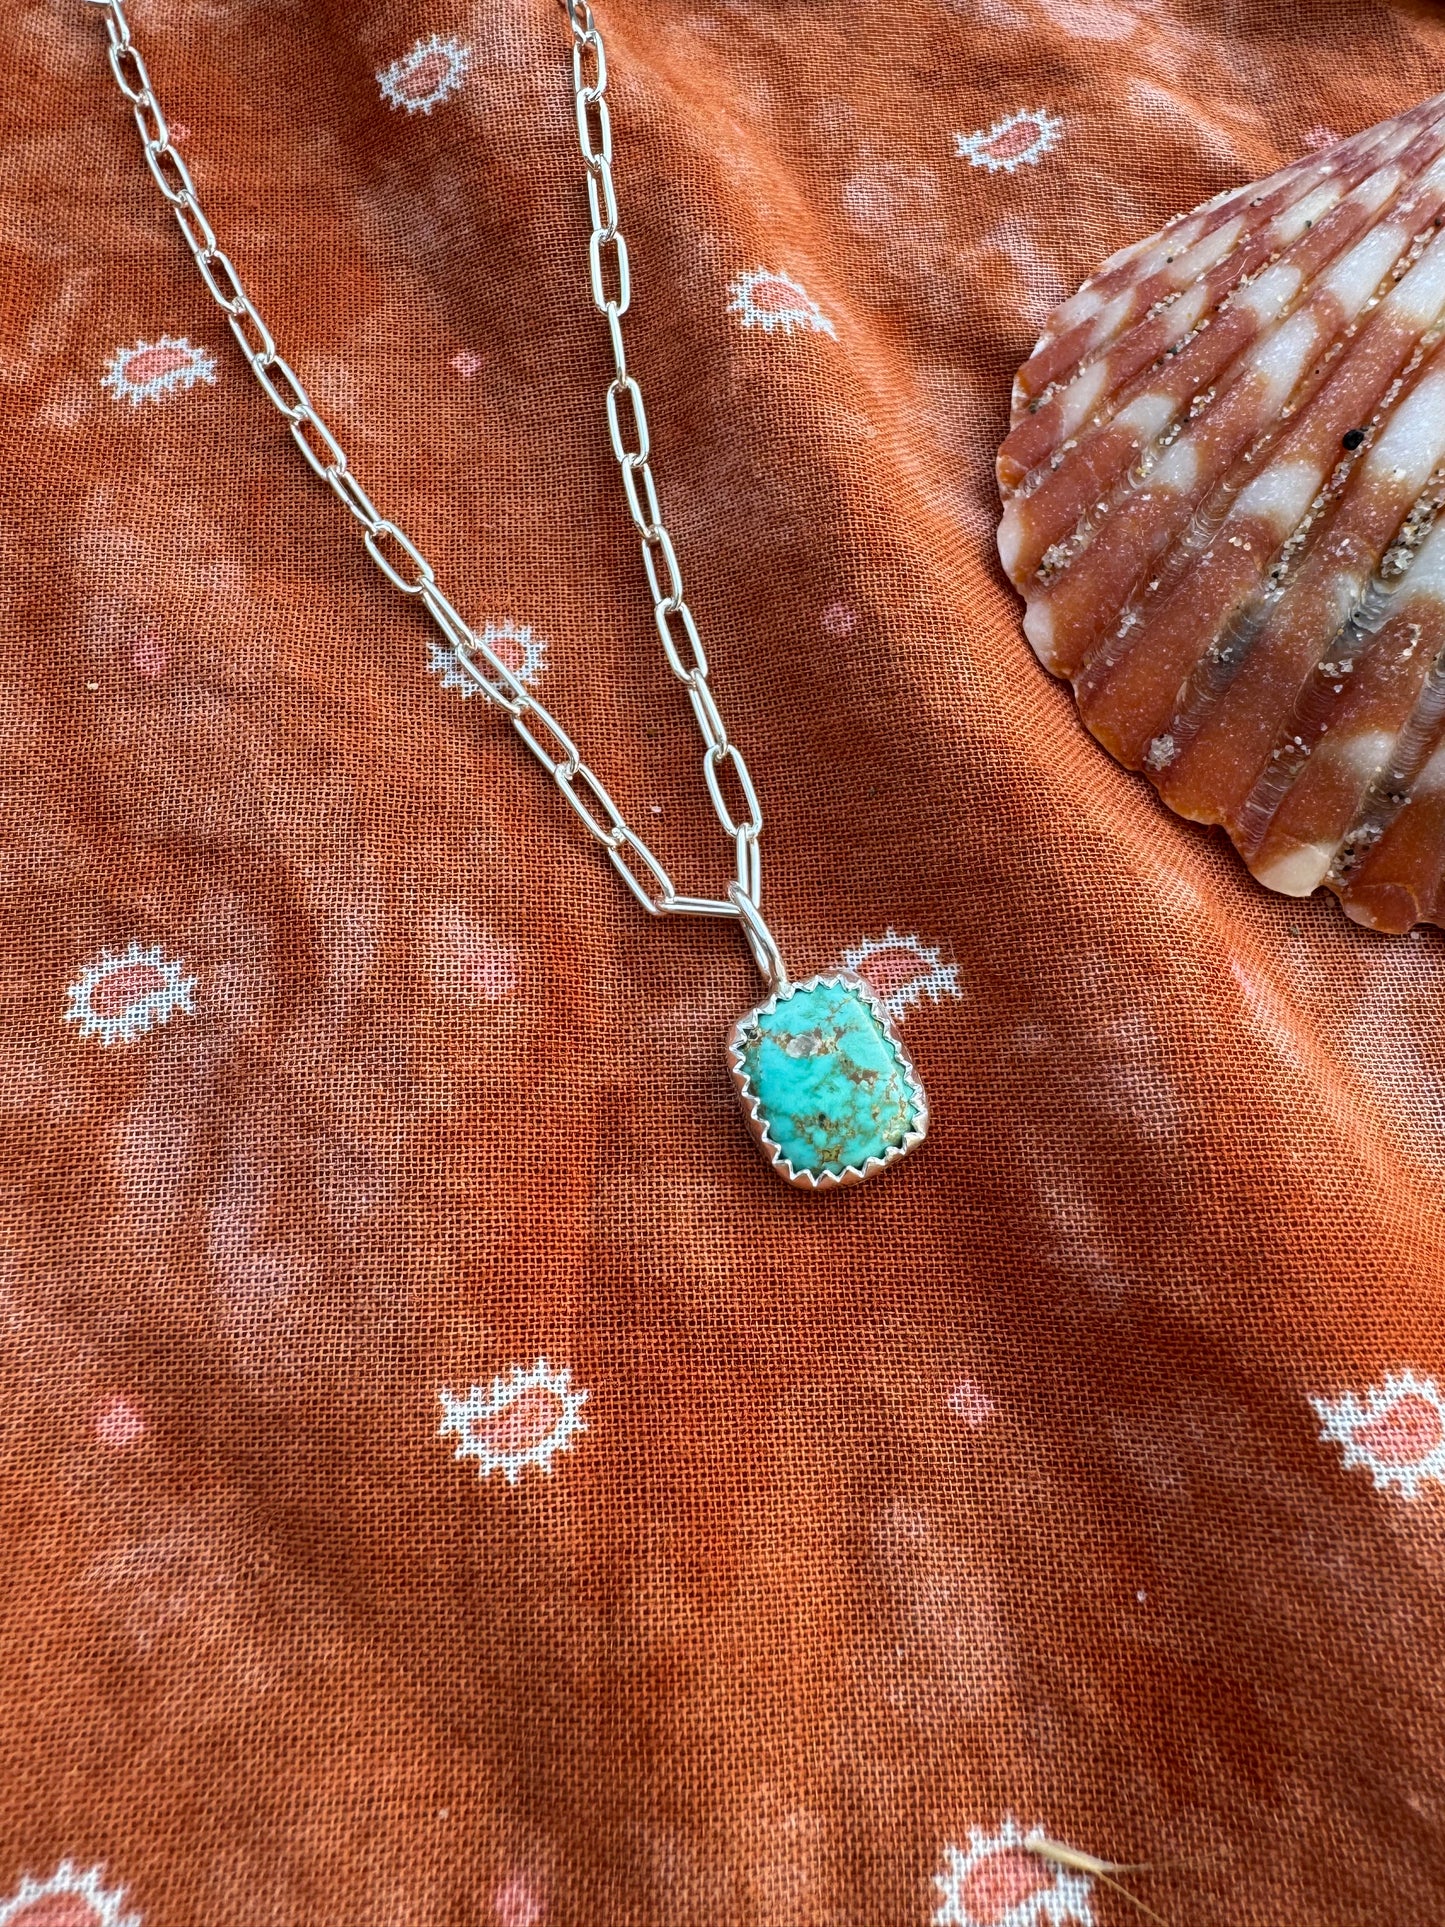 Sierra Bella Turquoise Necklace no.8